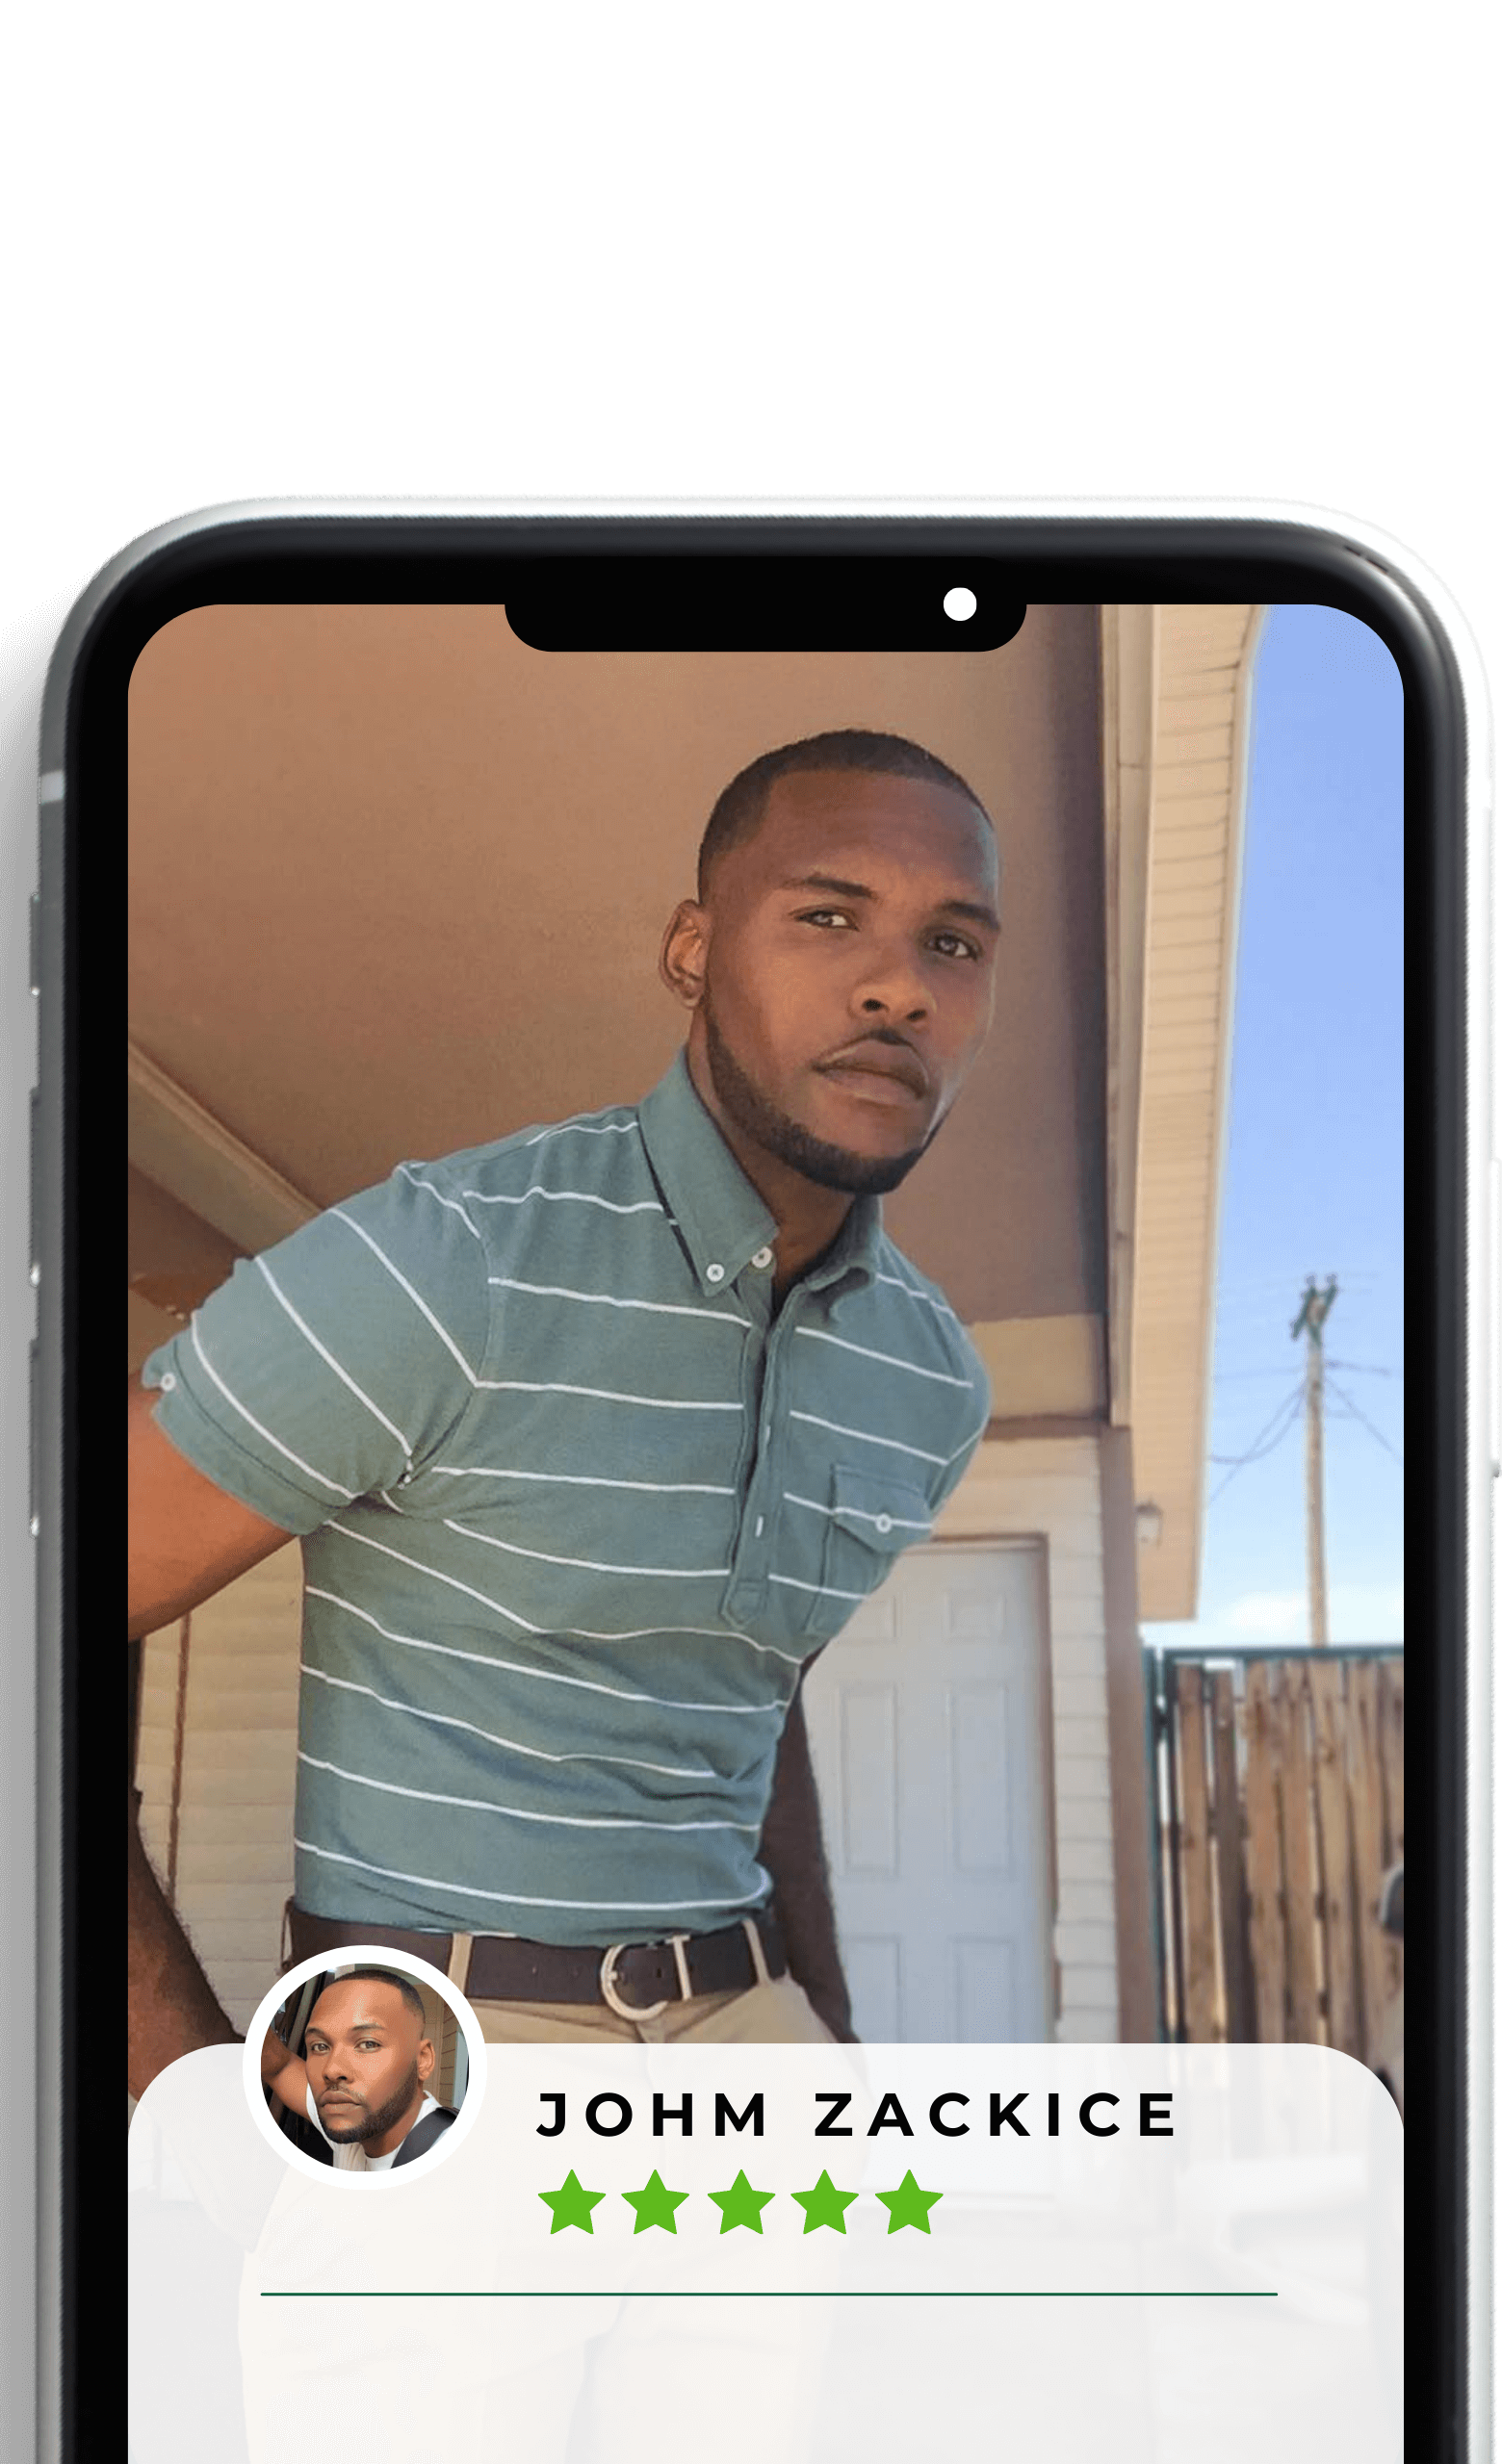 A man in striped shirt standing on top of his phone.